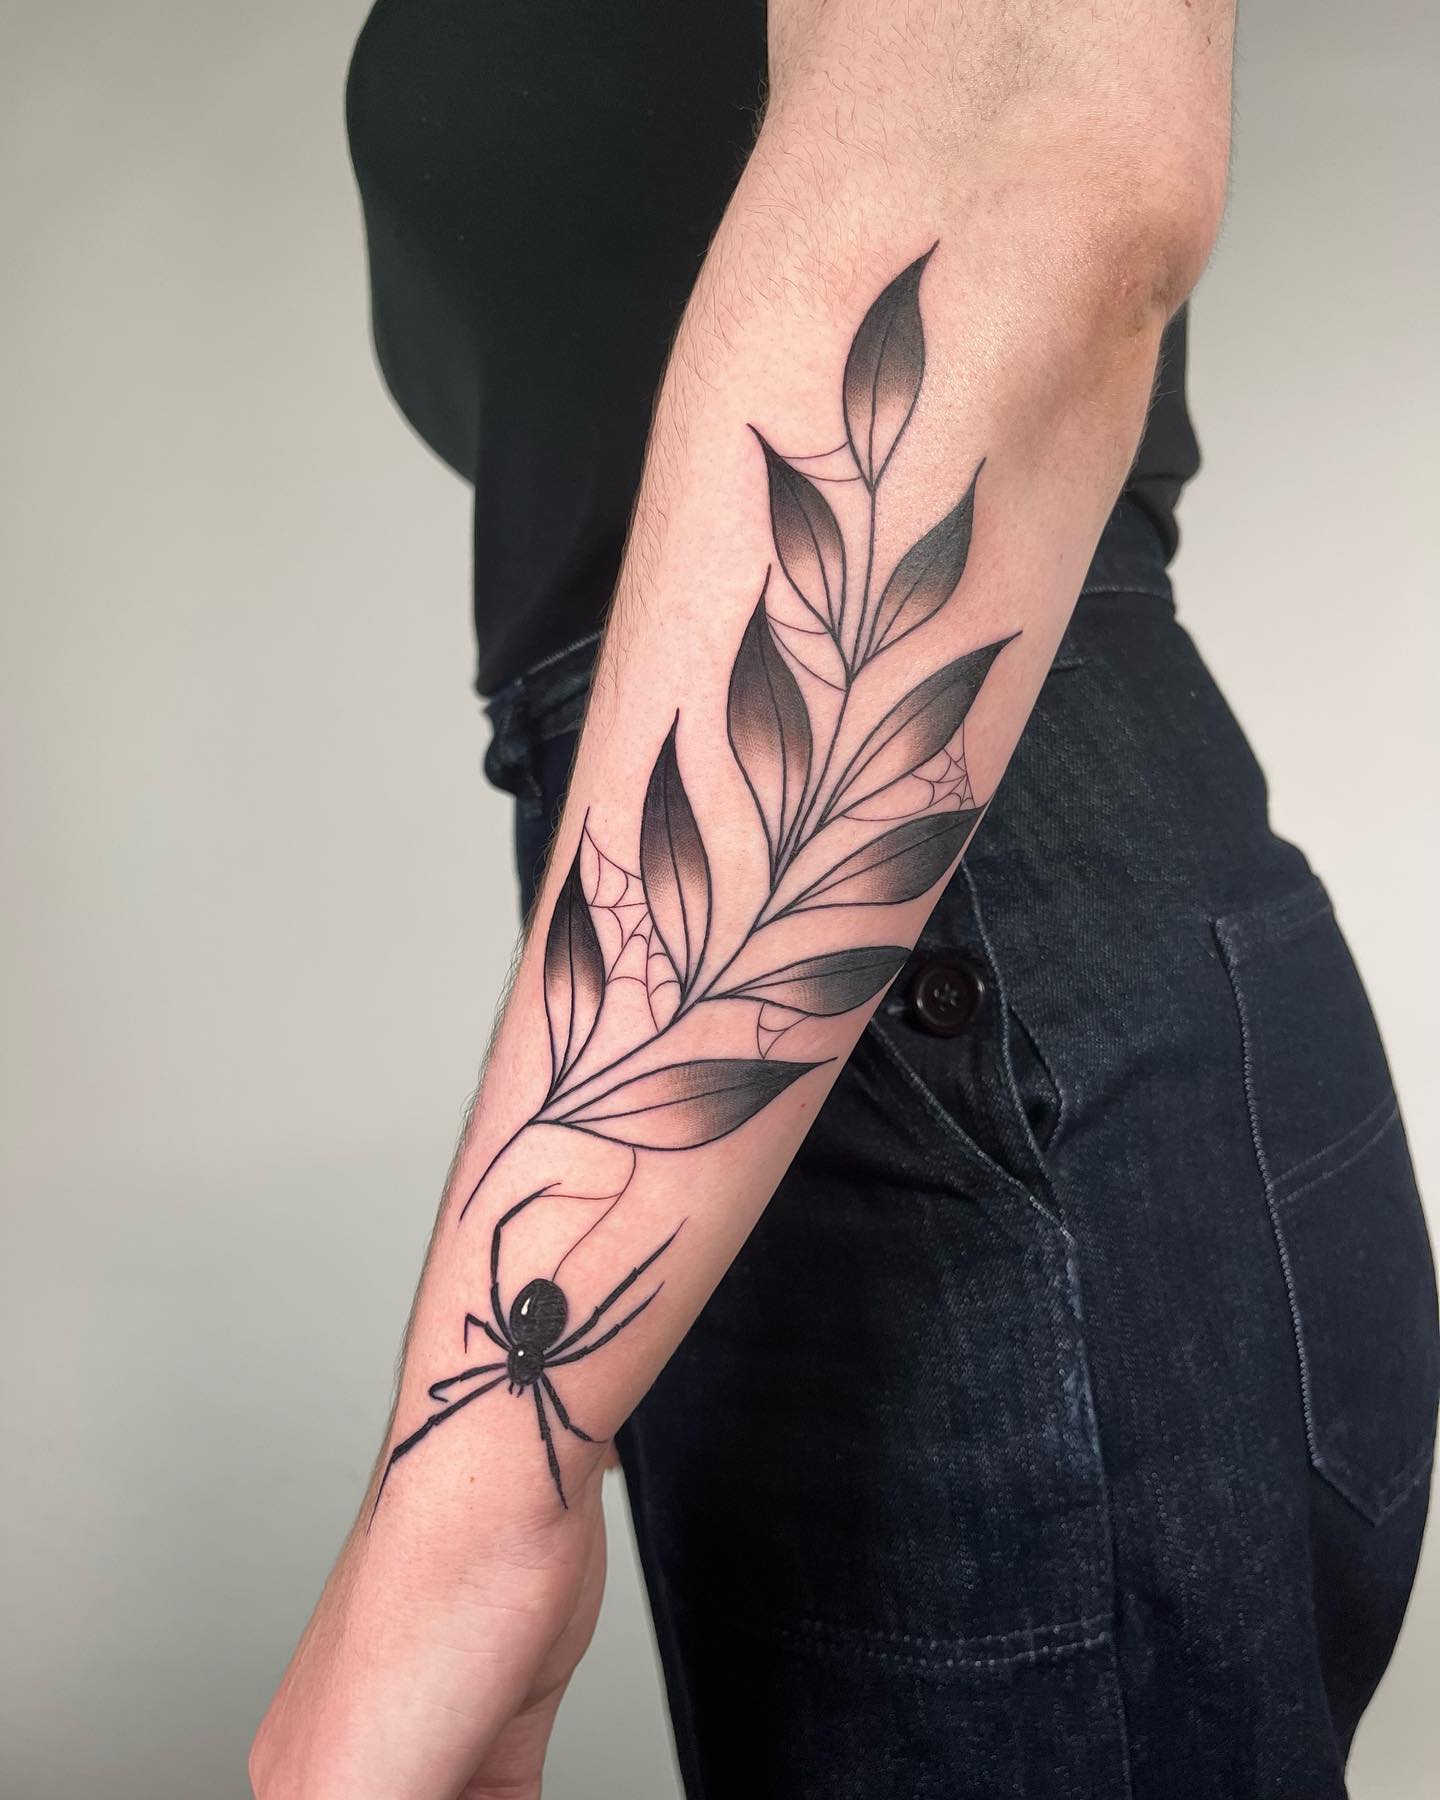  Leaves cannot be imagined without animals on them, can they? To give botanical vibe on your arm with your tattoo, some leaves that are covered in a spider's web and a spider below are all you need.